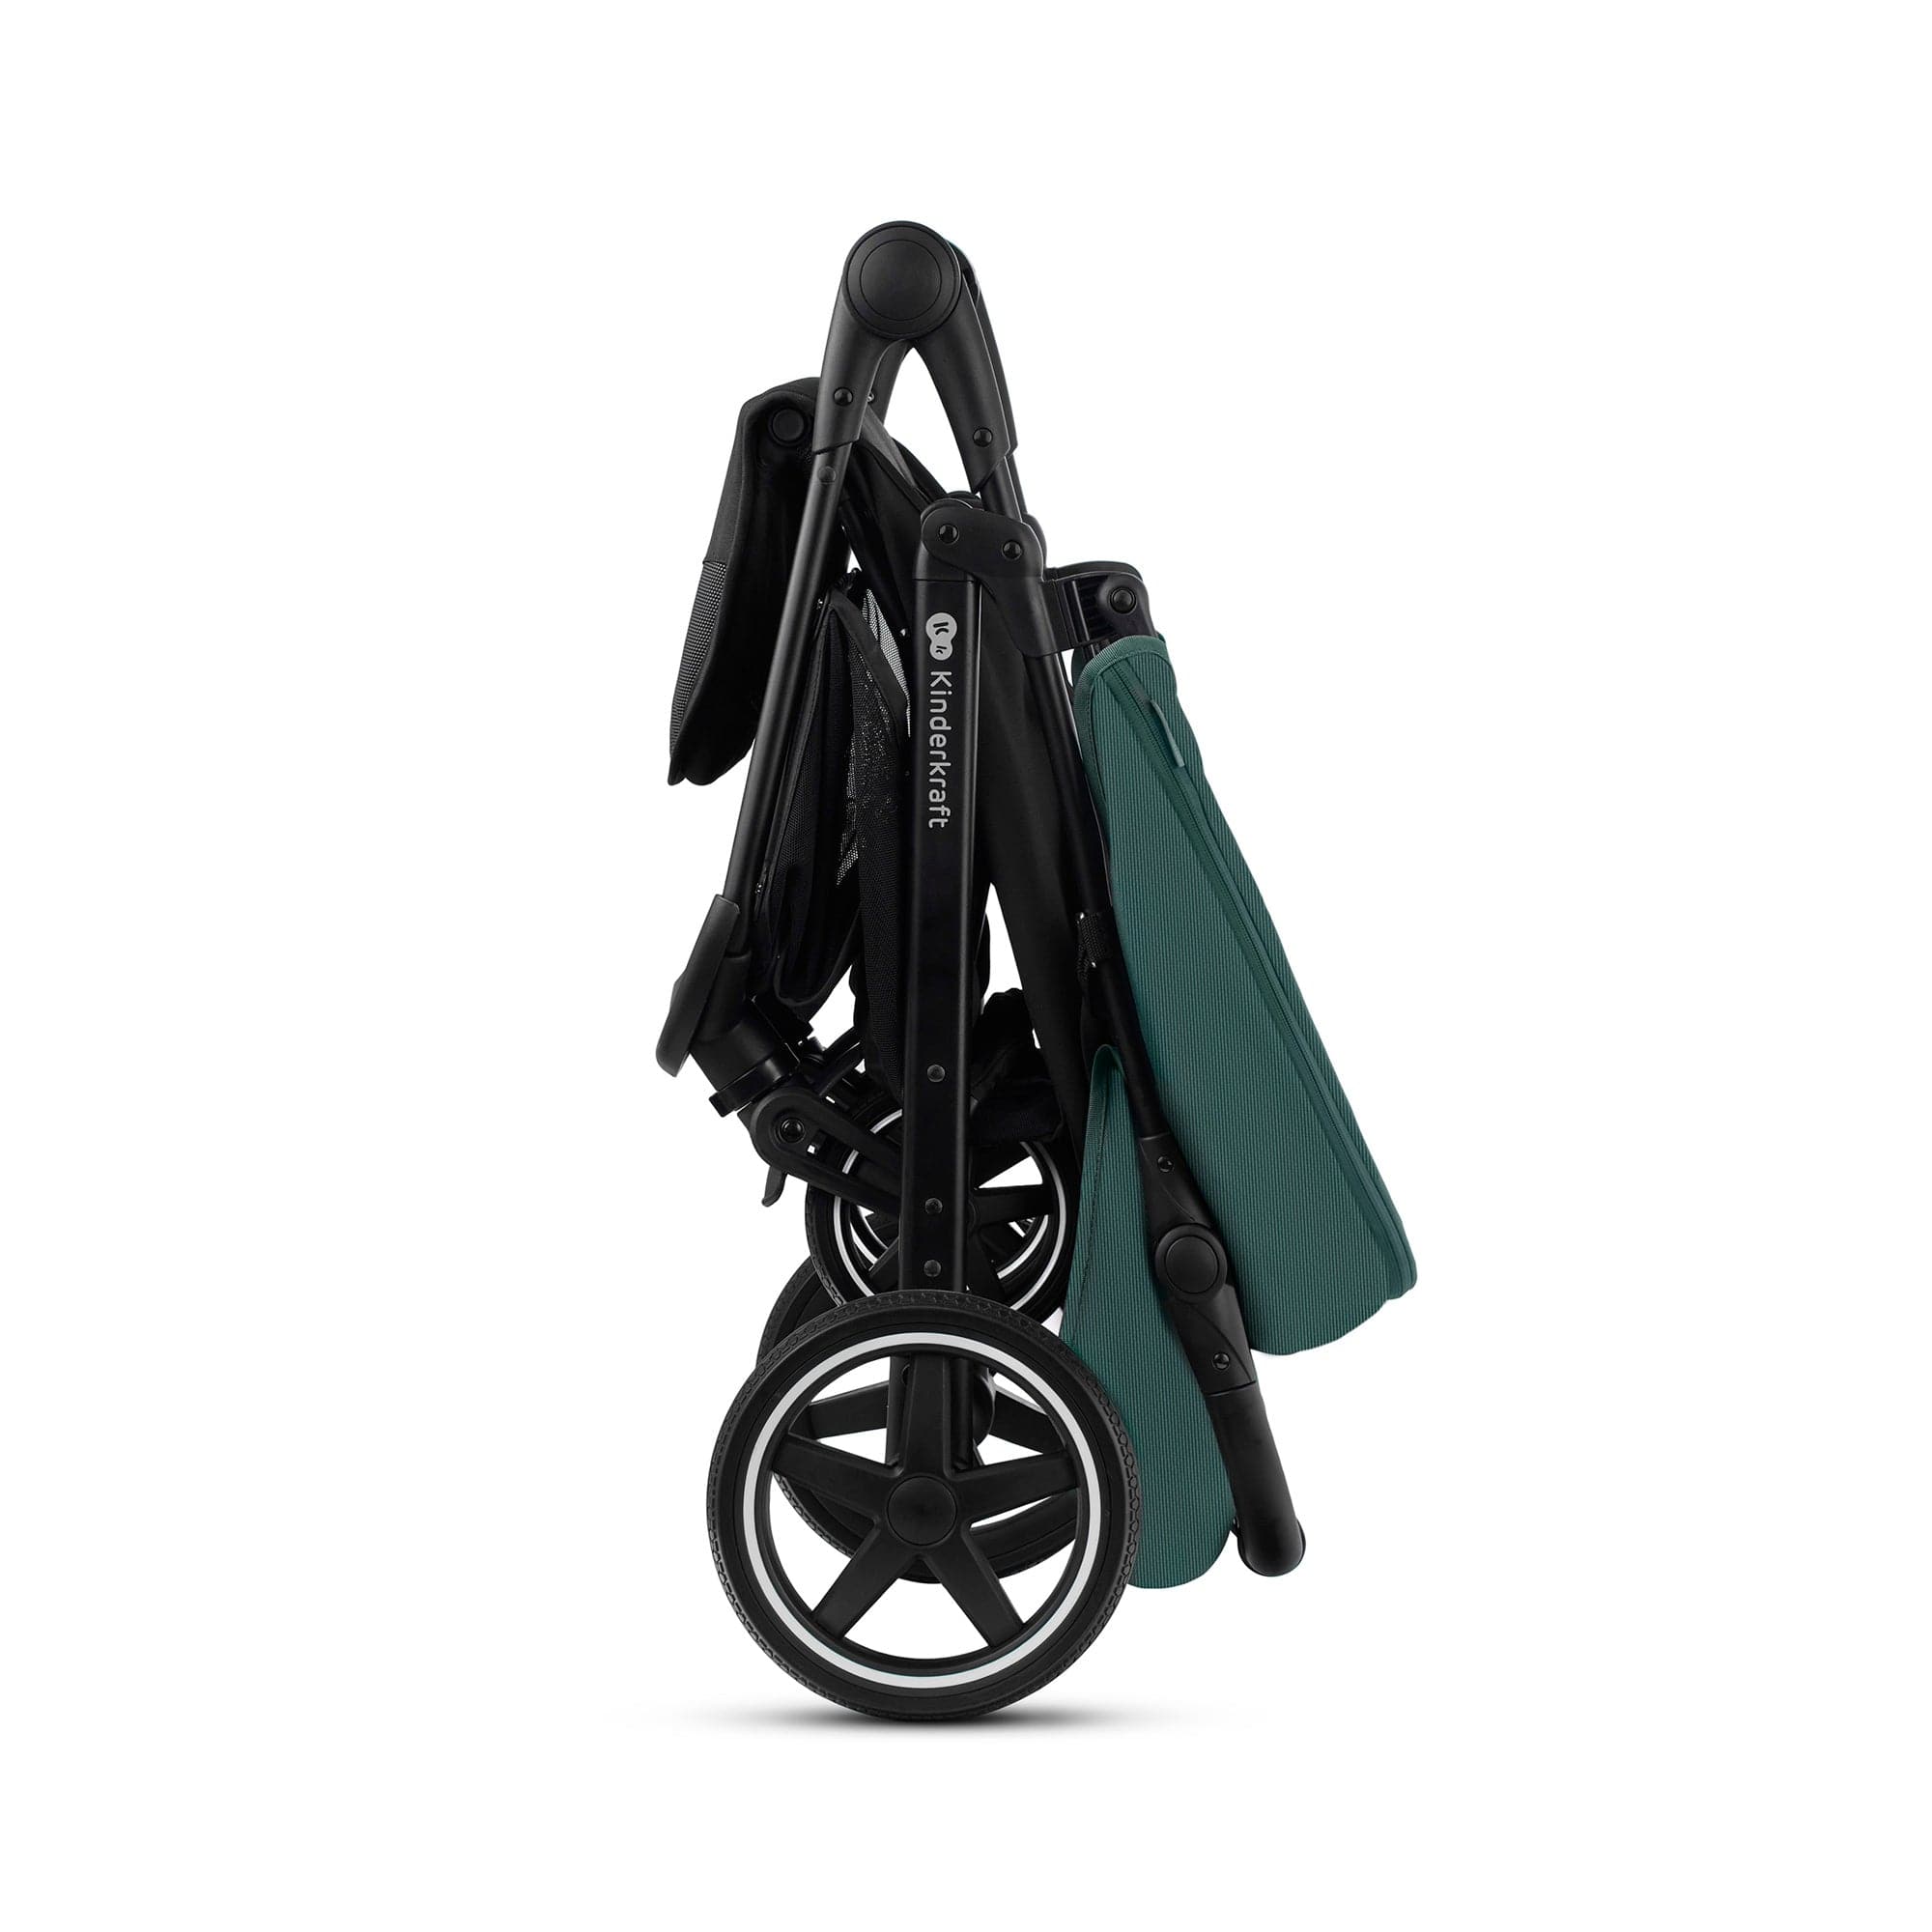 Kinderkraft pushchair Route - Green - For Your Little One